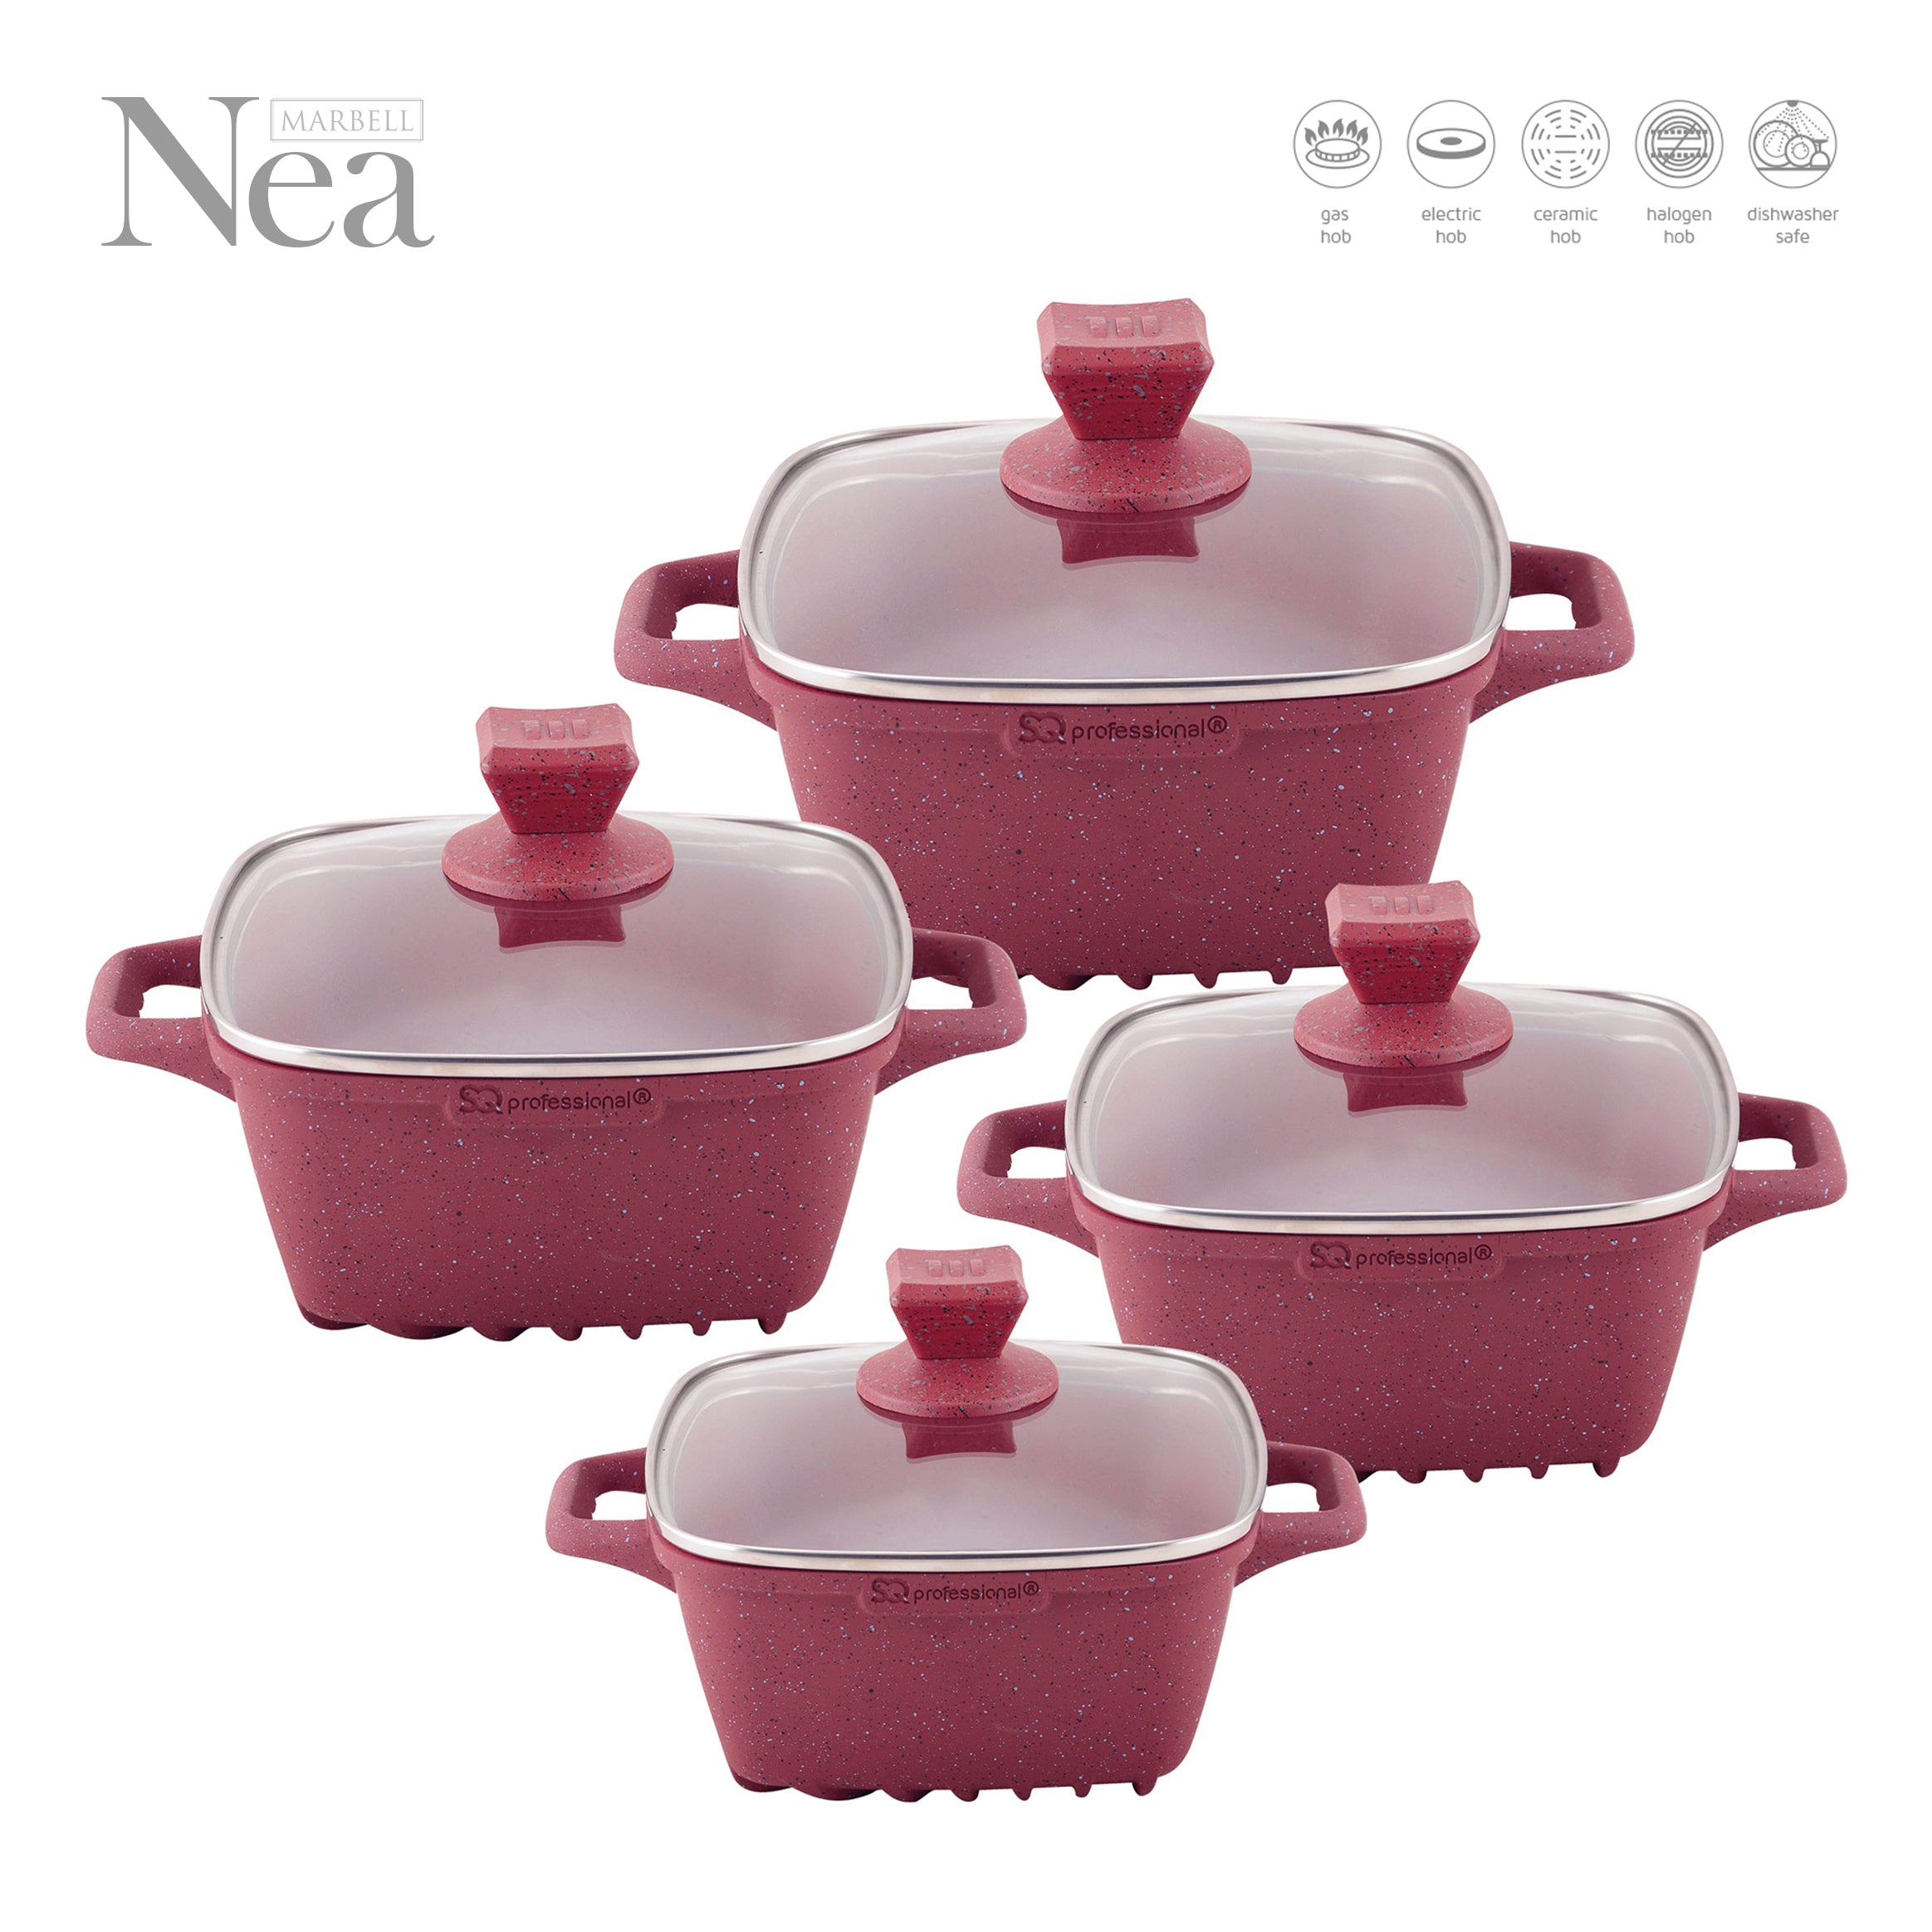 Marble Stockpots - NEA MARBELL - Red - Square - 4 Pcs Set